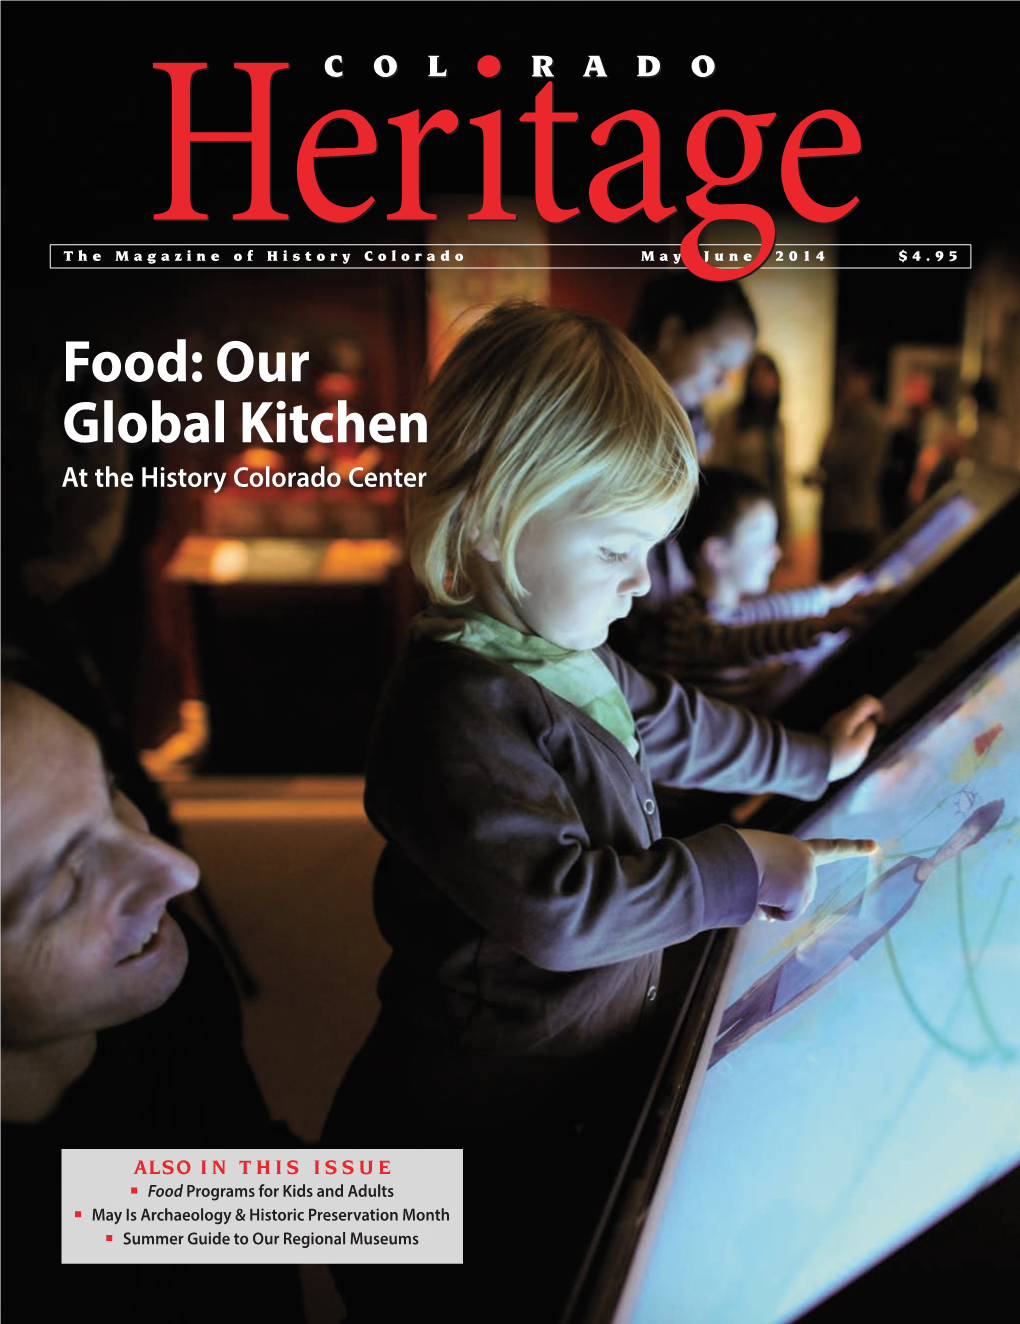 Food: Our Global Kitchen at the History Colorado Center